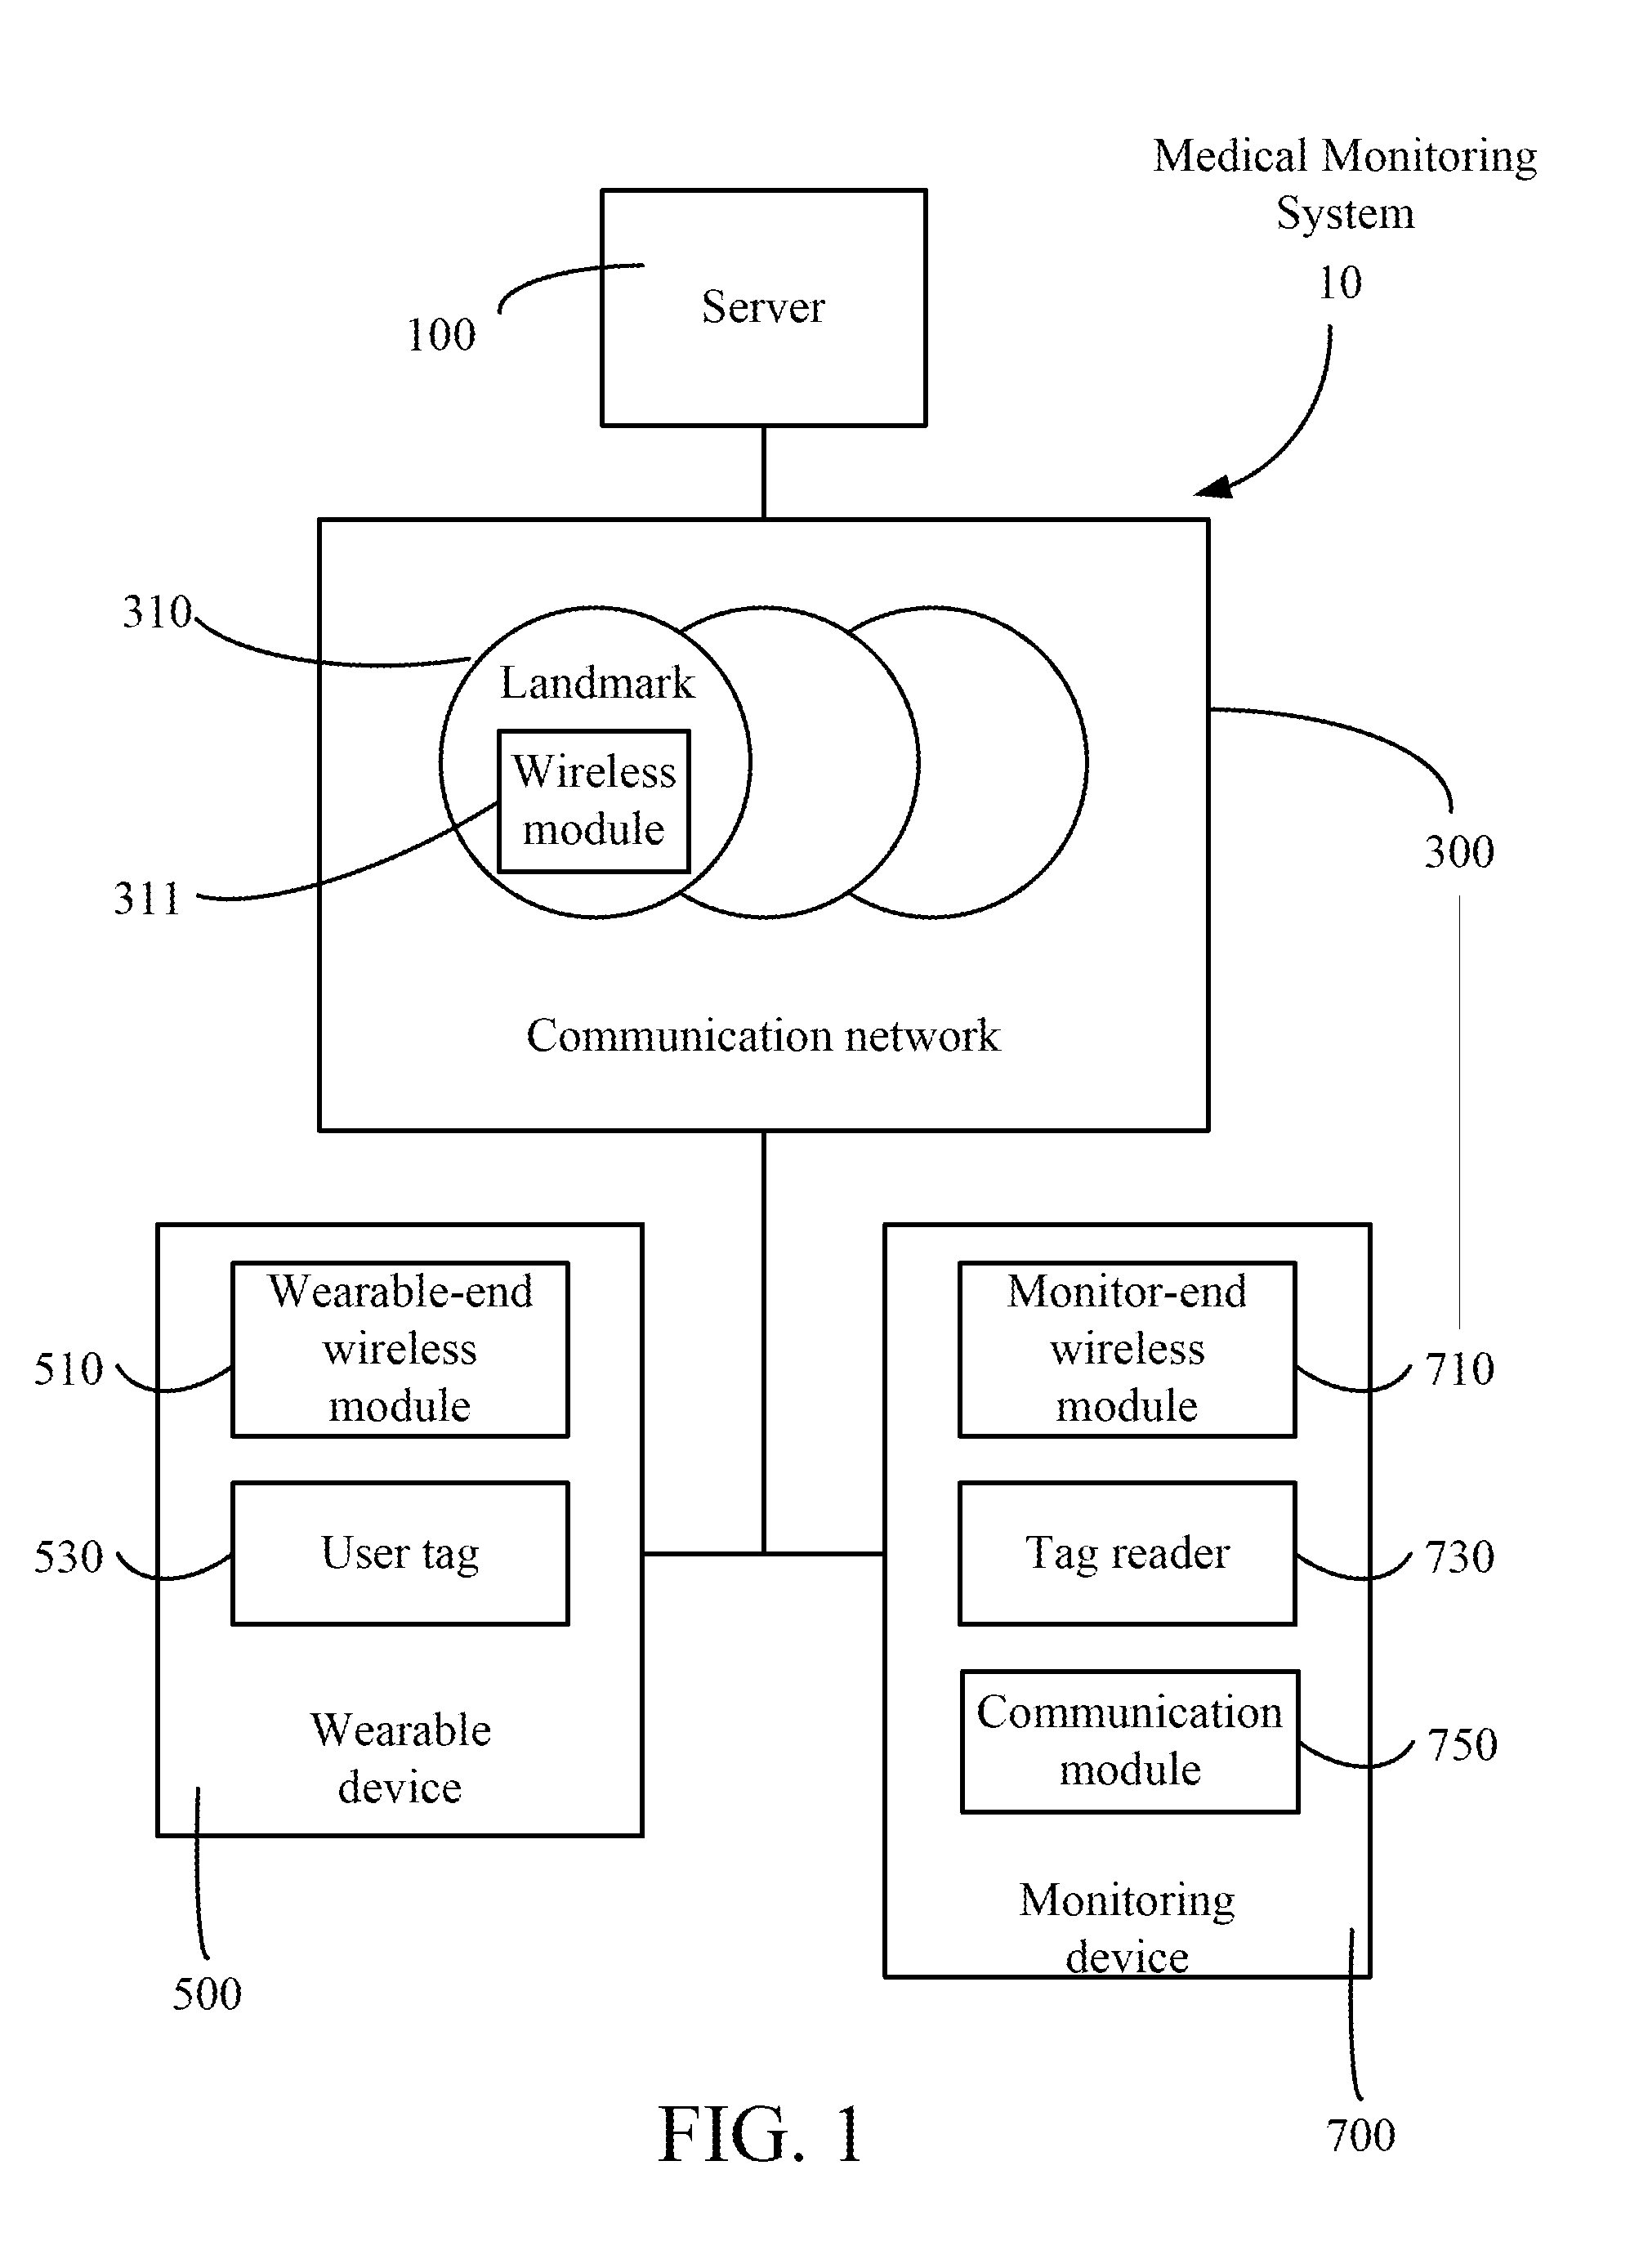 System and device for medical monitoring